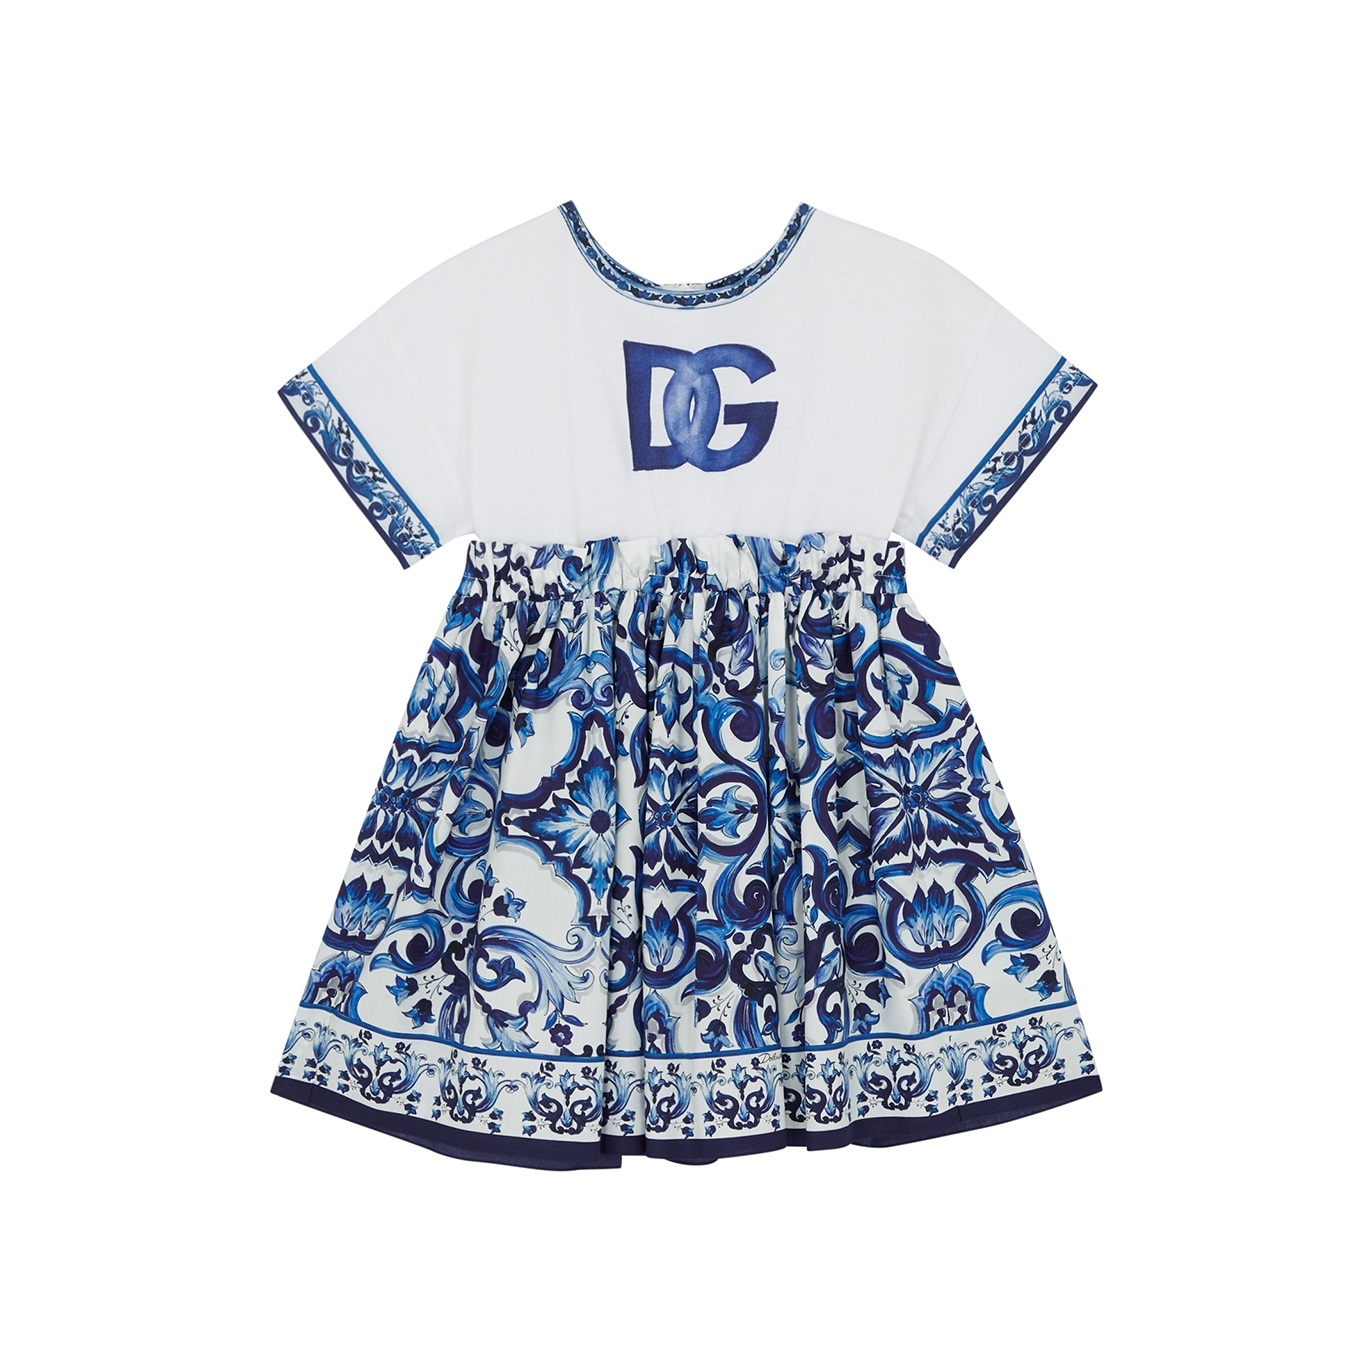 Dolce & Gabbana Kids Printed Cotton Dress (2-6 Years) - White Other - 2 Years